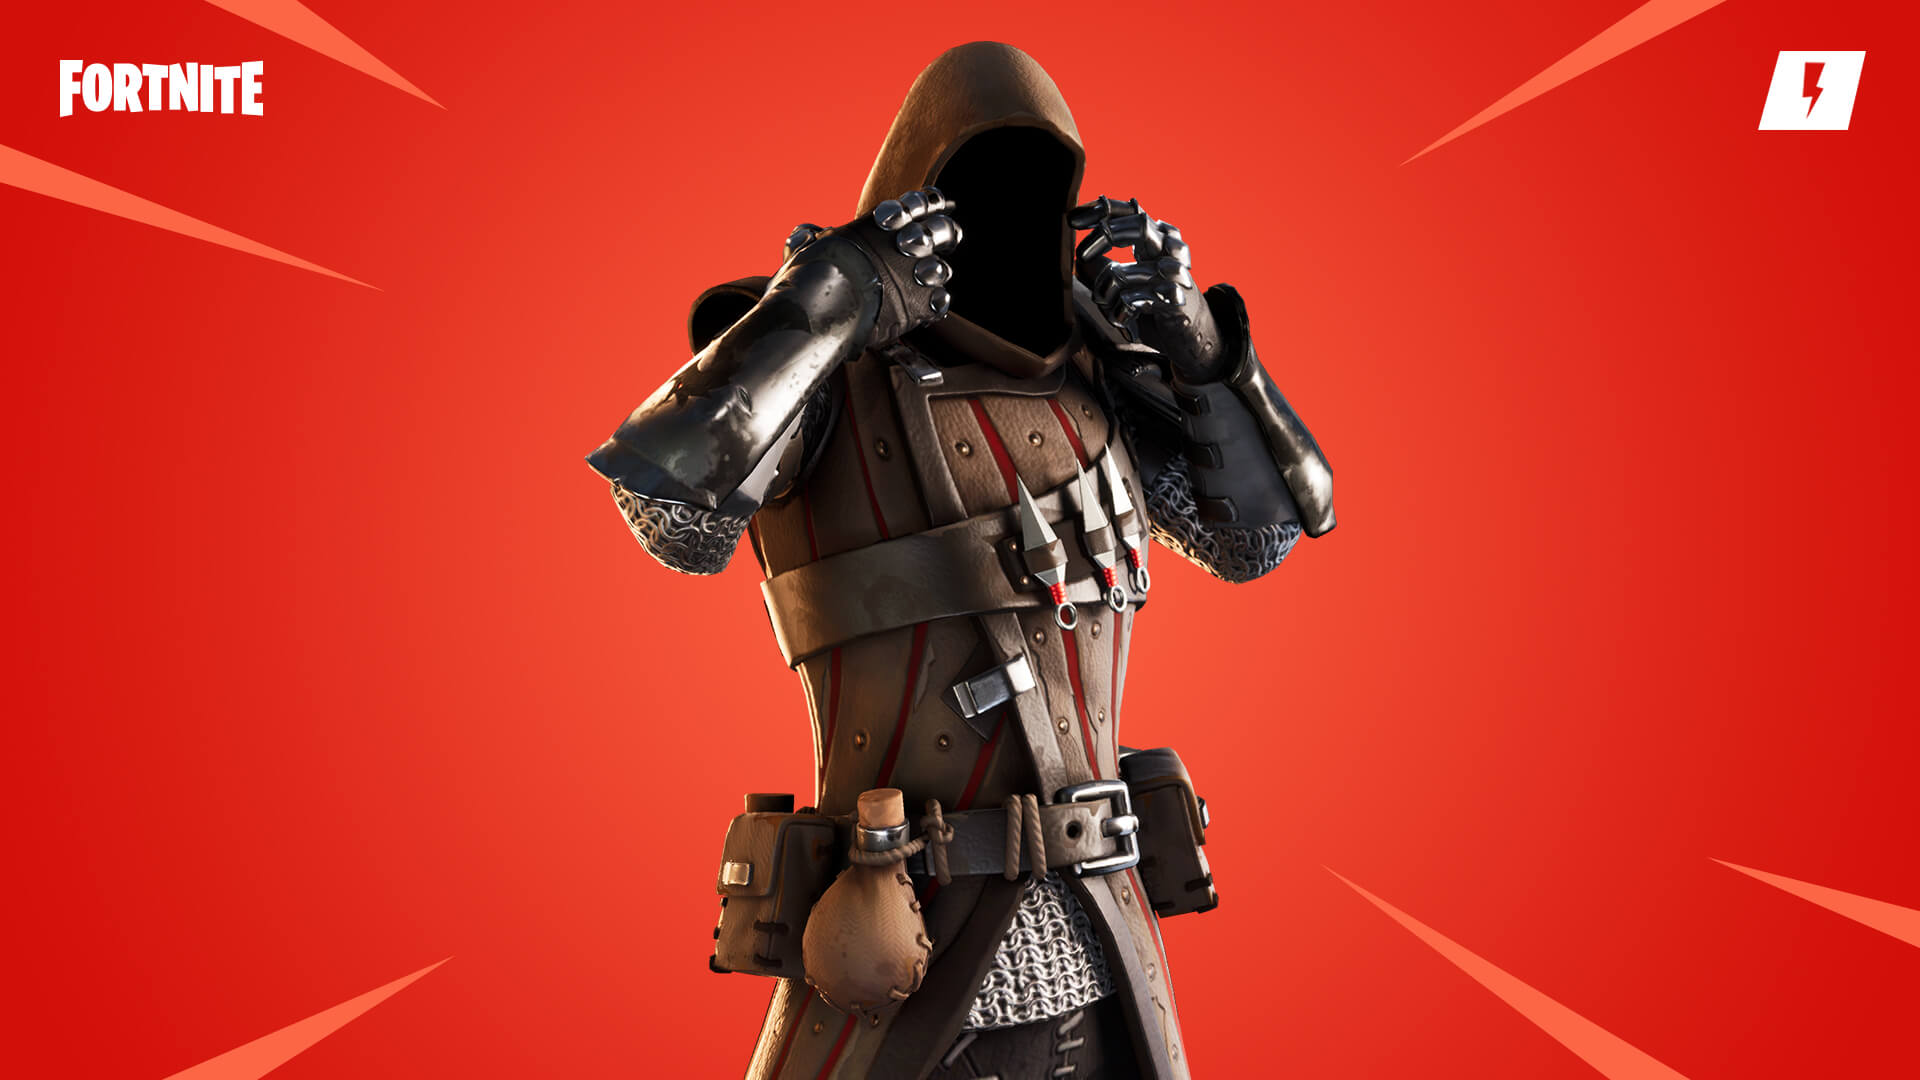 Fortnite V24.10 Update: Epic Games brings Chaos Agent, The Swamp Knight, Mermonster Ken, and more to Fortnite Battle Royale